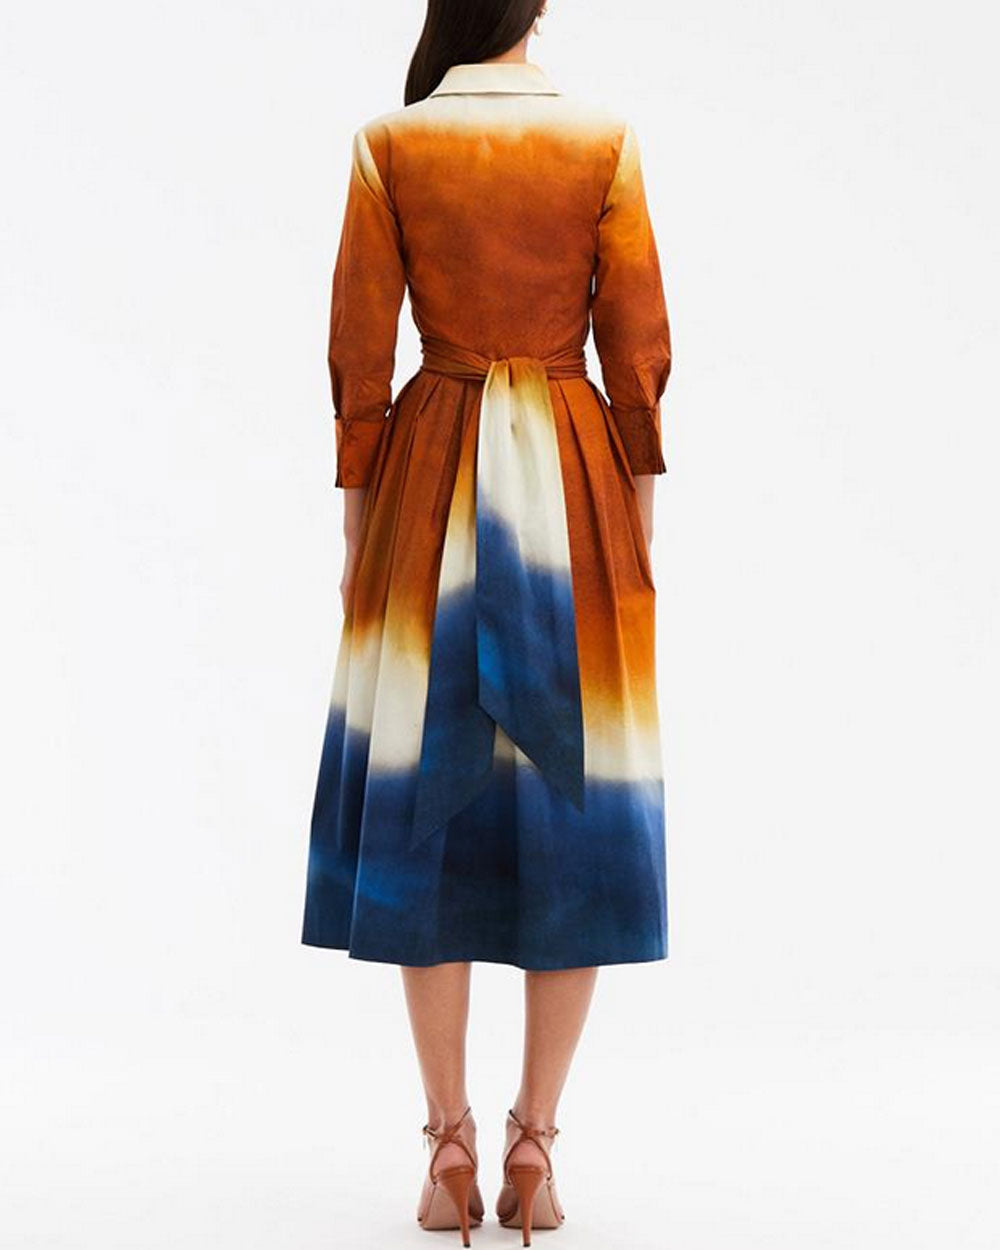 Canyon and Navy Ombre Wrap Dress